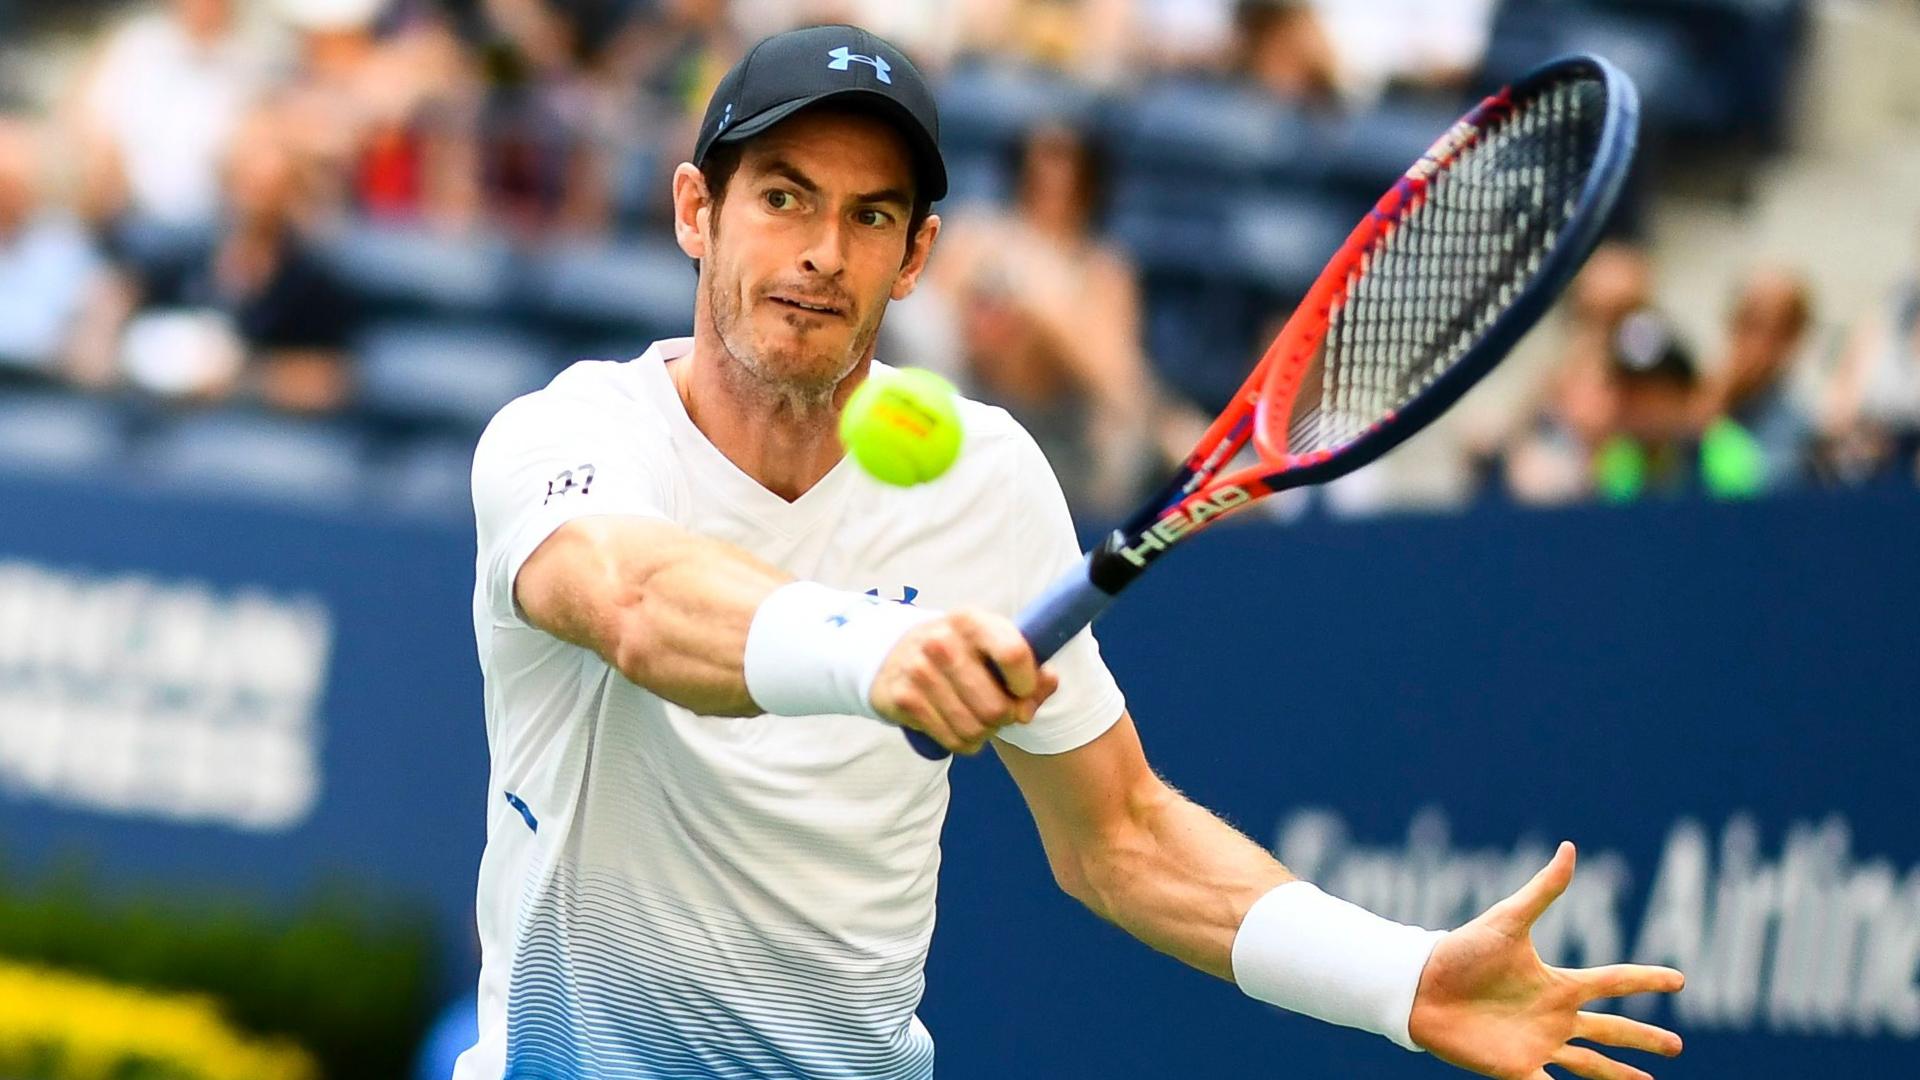 Mandatory Credit: Photo by Javier Garcia/BPI/REX/Shutterstock (9826937aw)Andy Murray during his second round matchUS Open Tennis Championships, Day 3, USTA National Tennis Center, Flushing Meadows, New York, USA - 29 Aug 2018.